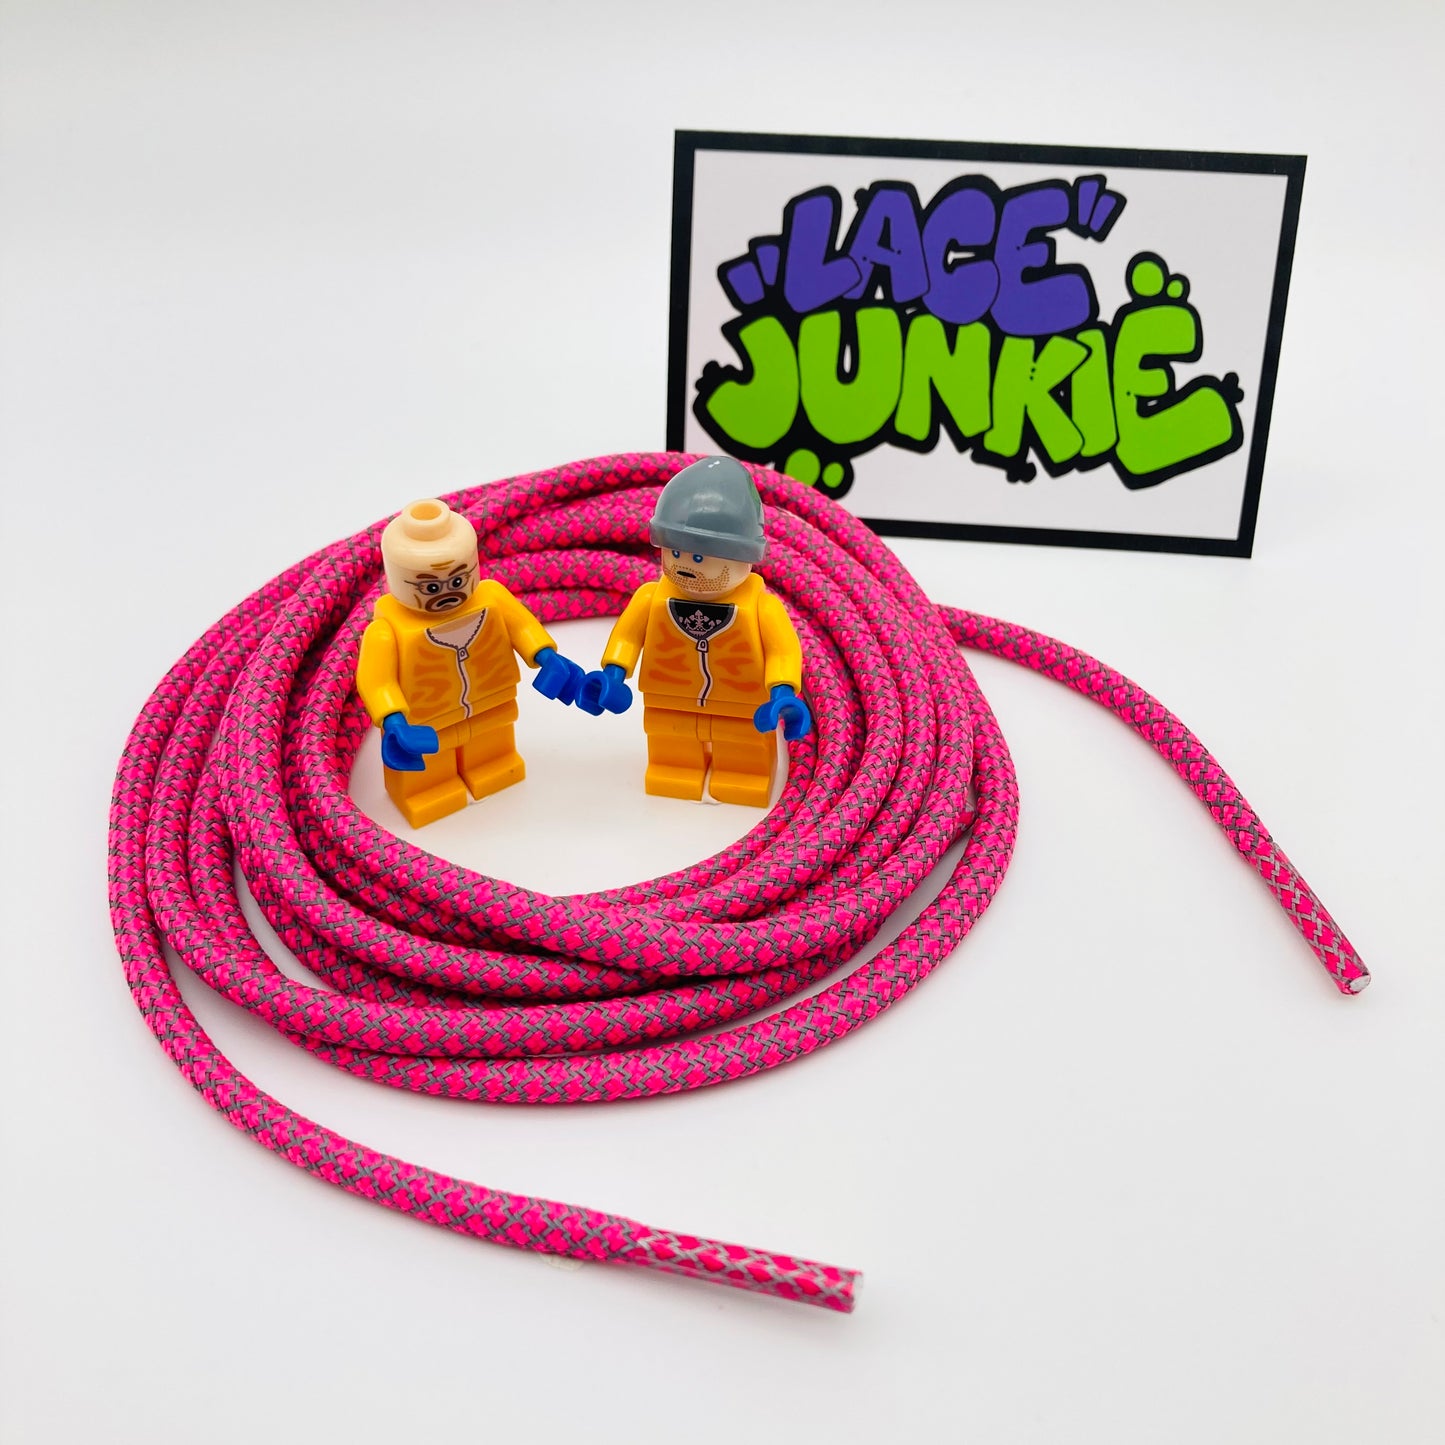 Lace Junkie Bright Pink 3M Reflective Rope Laces